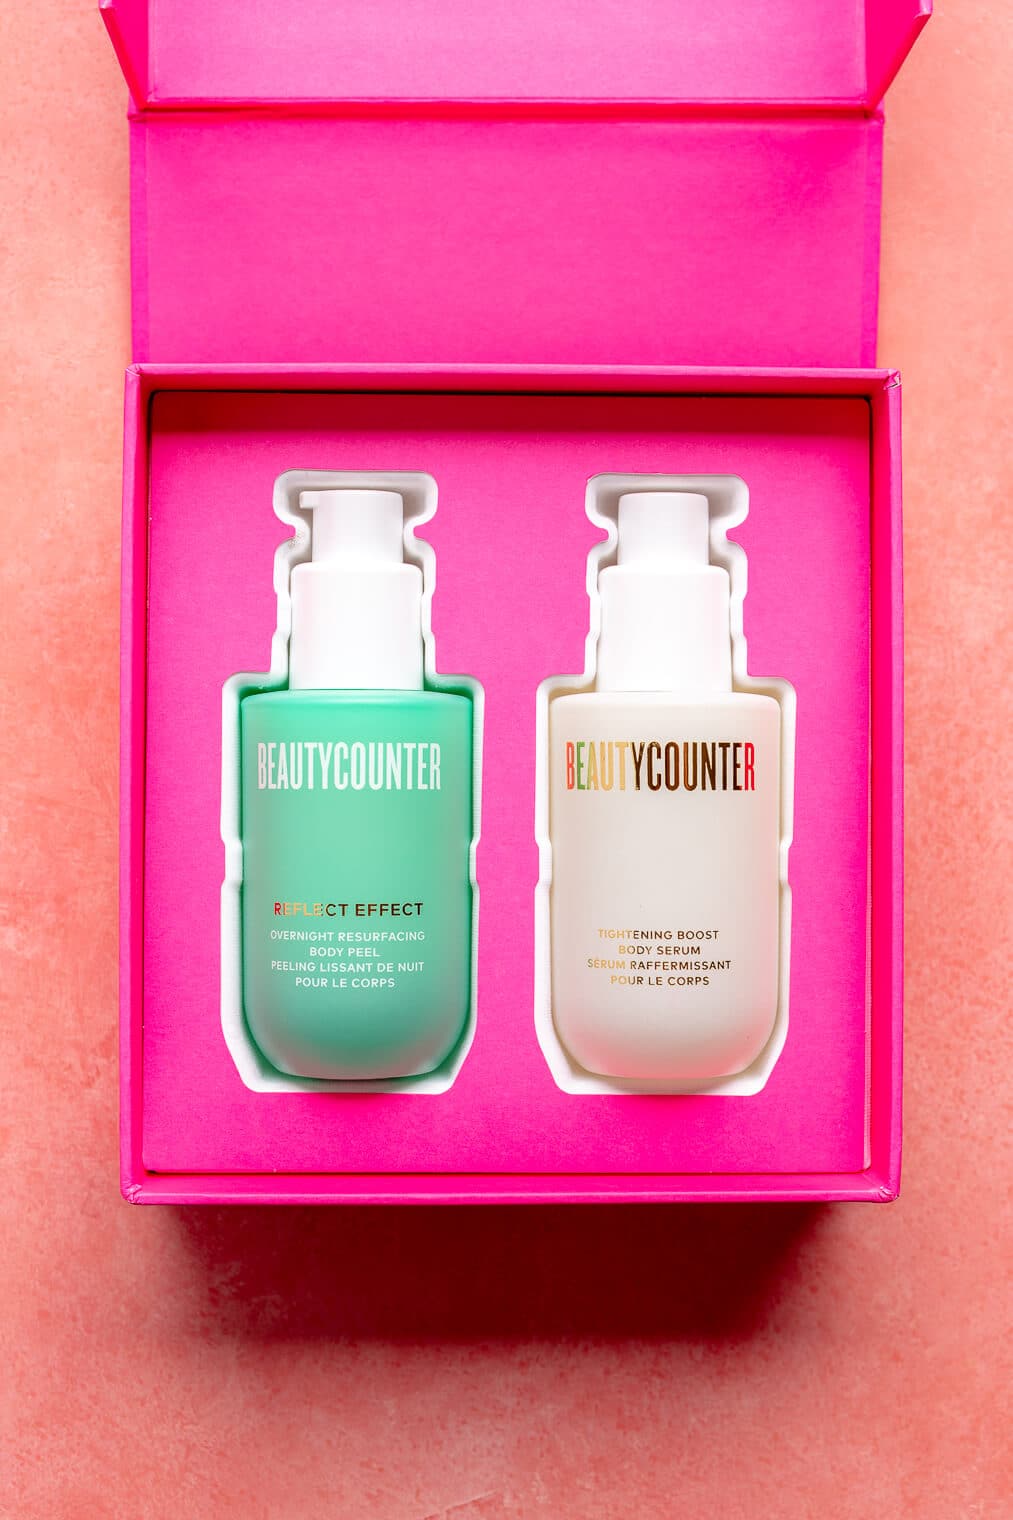 Two bottles, one is turquoise, one is white, nestled in a fuchsia box on a pink blush surface.